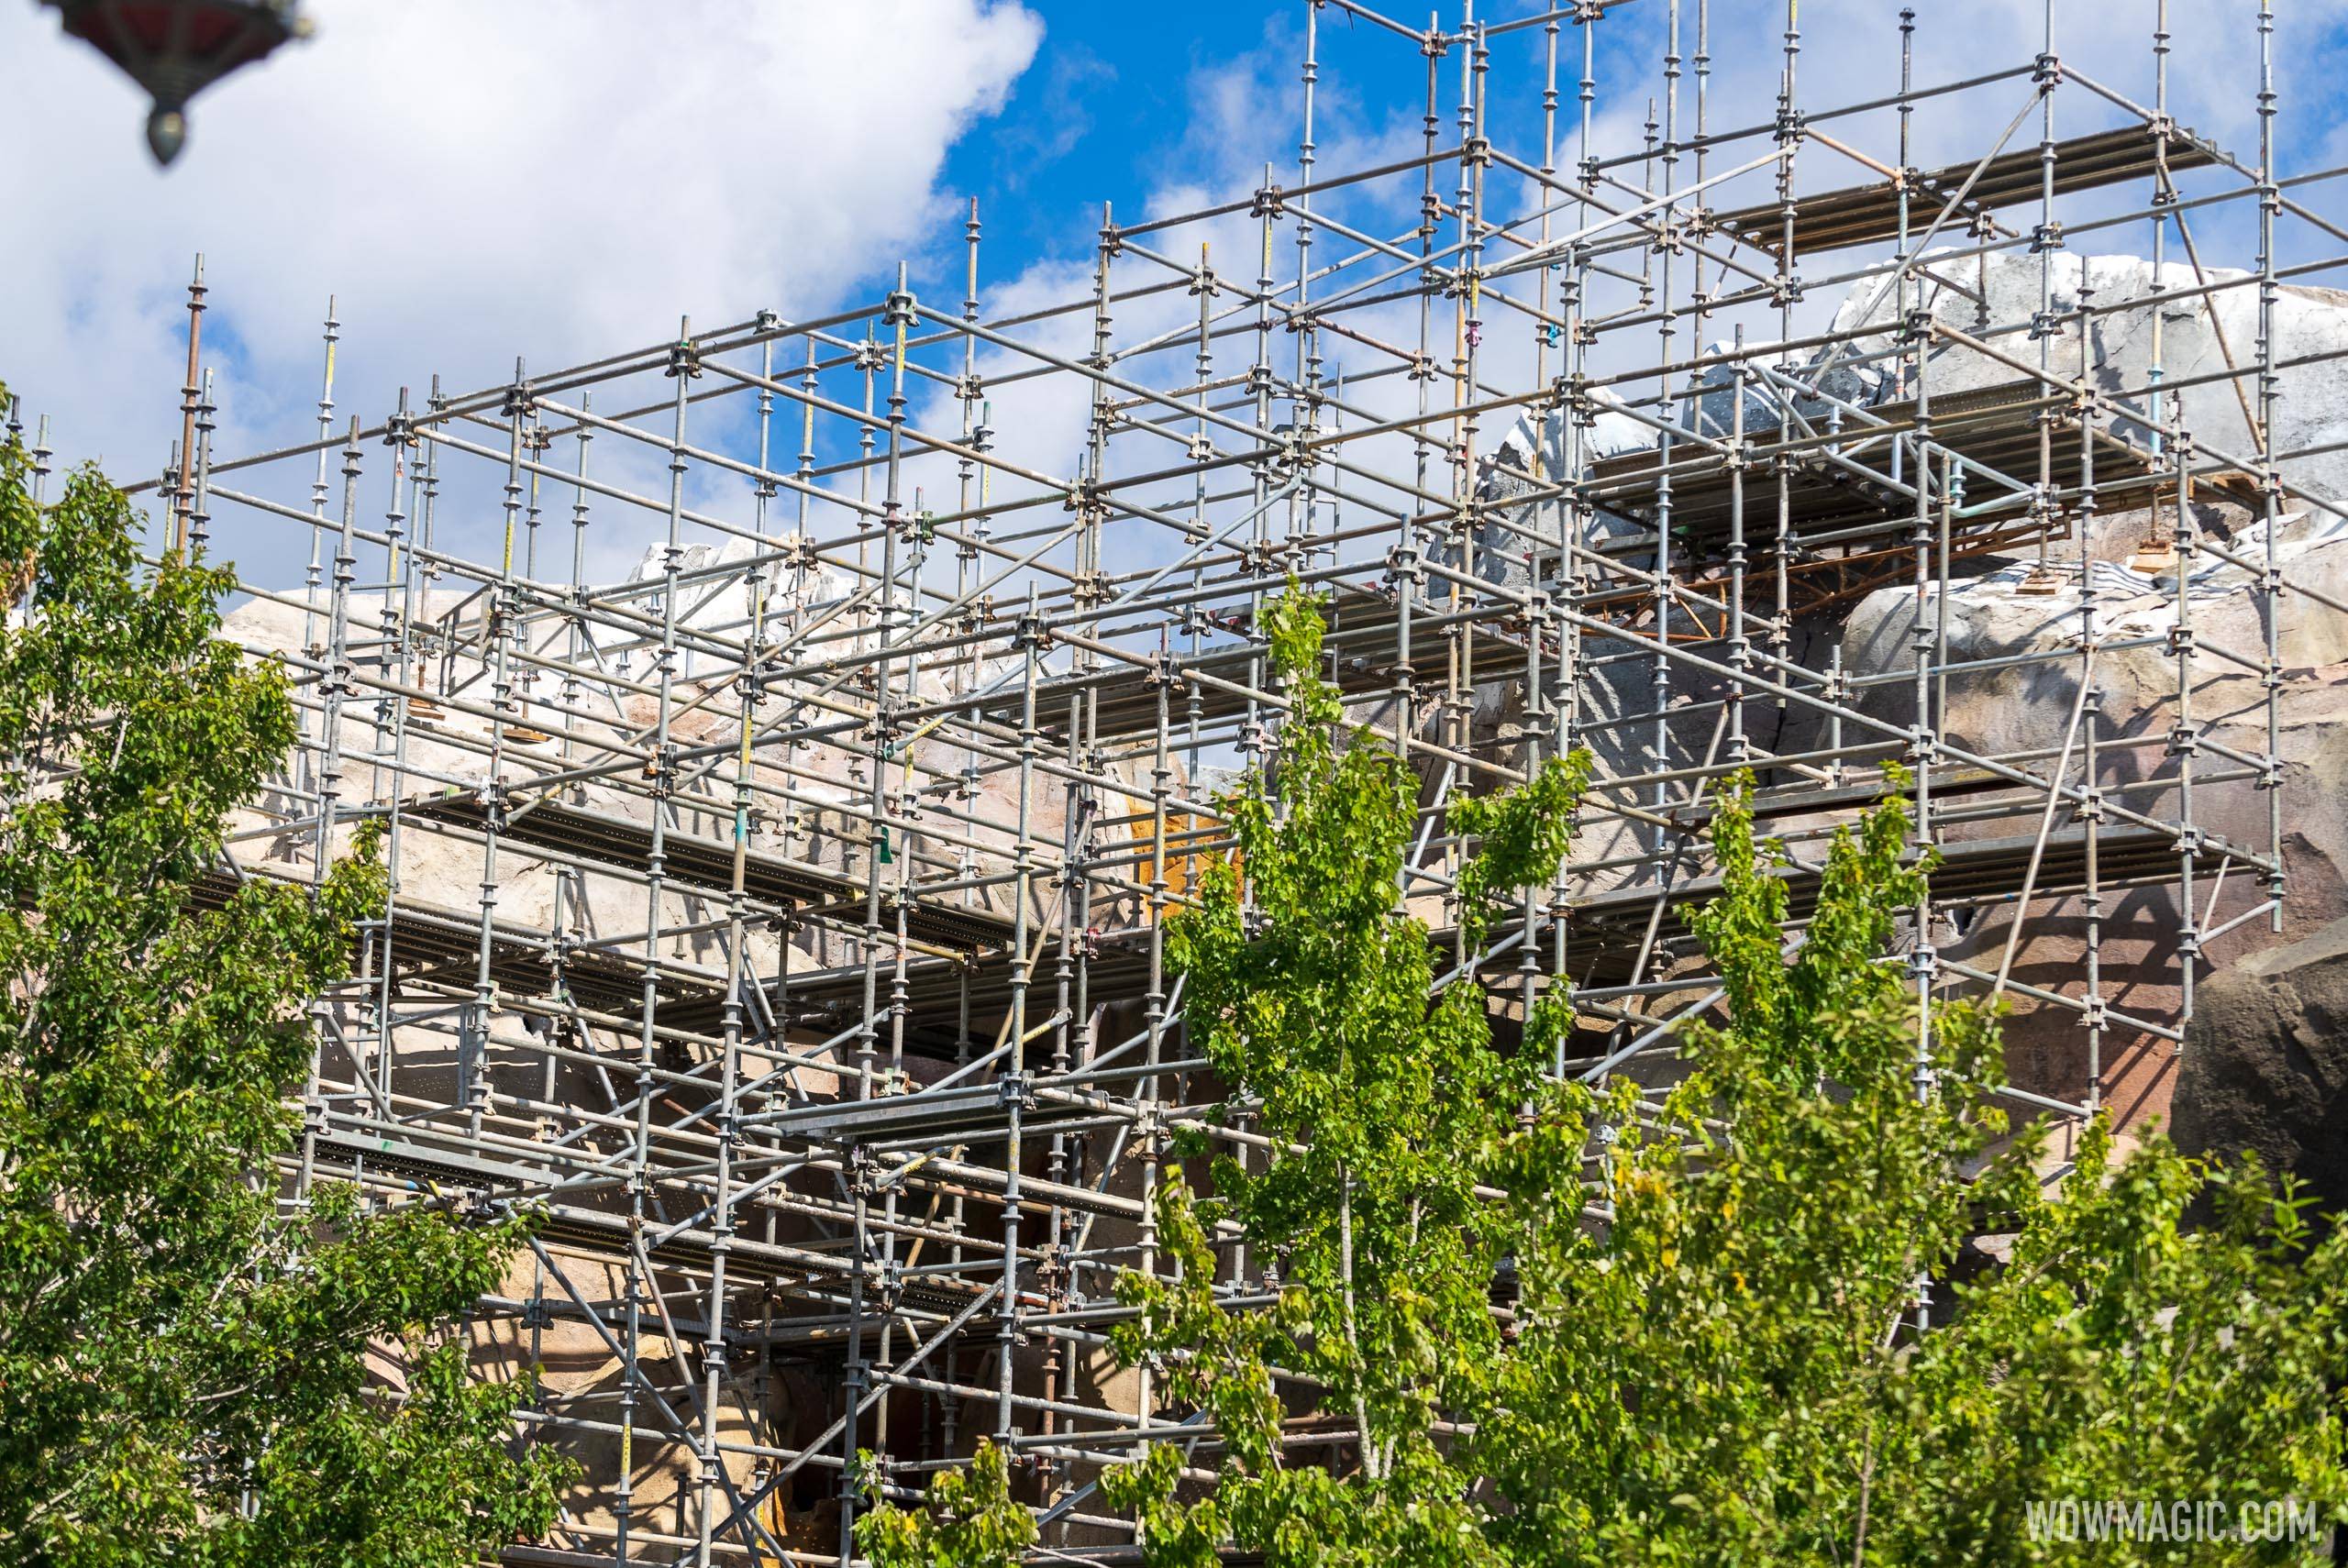 Be Our Guest exterior refurbishment - July 21 2021